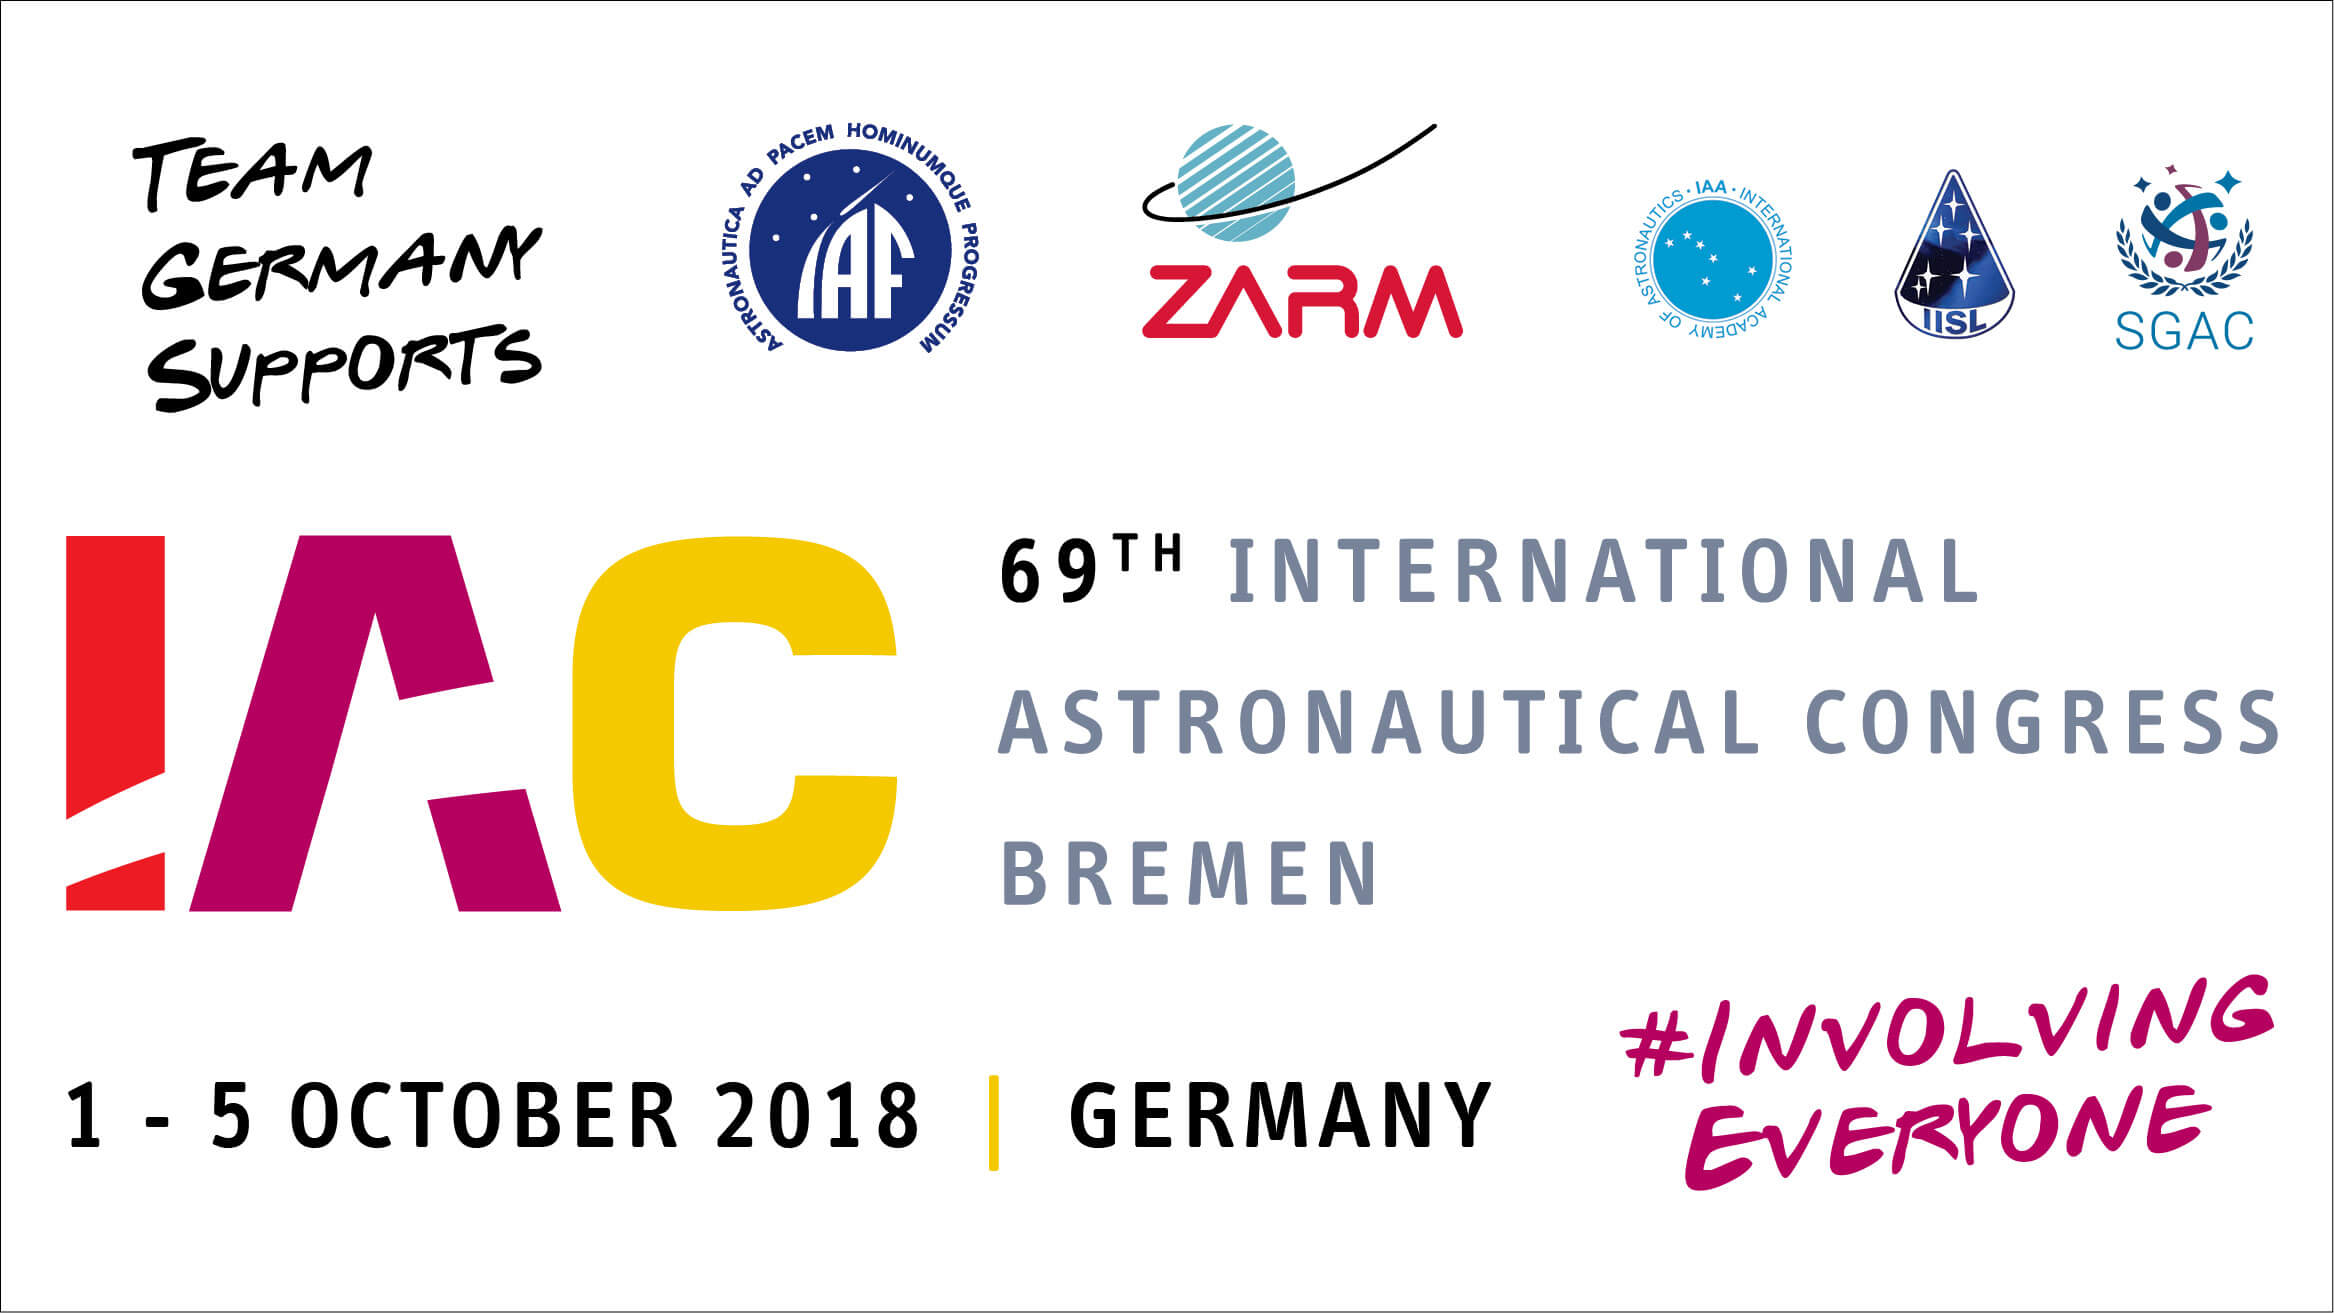 Amphinicy is exhibiting at IAC 2018!